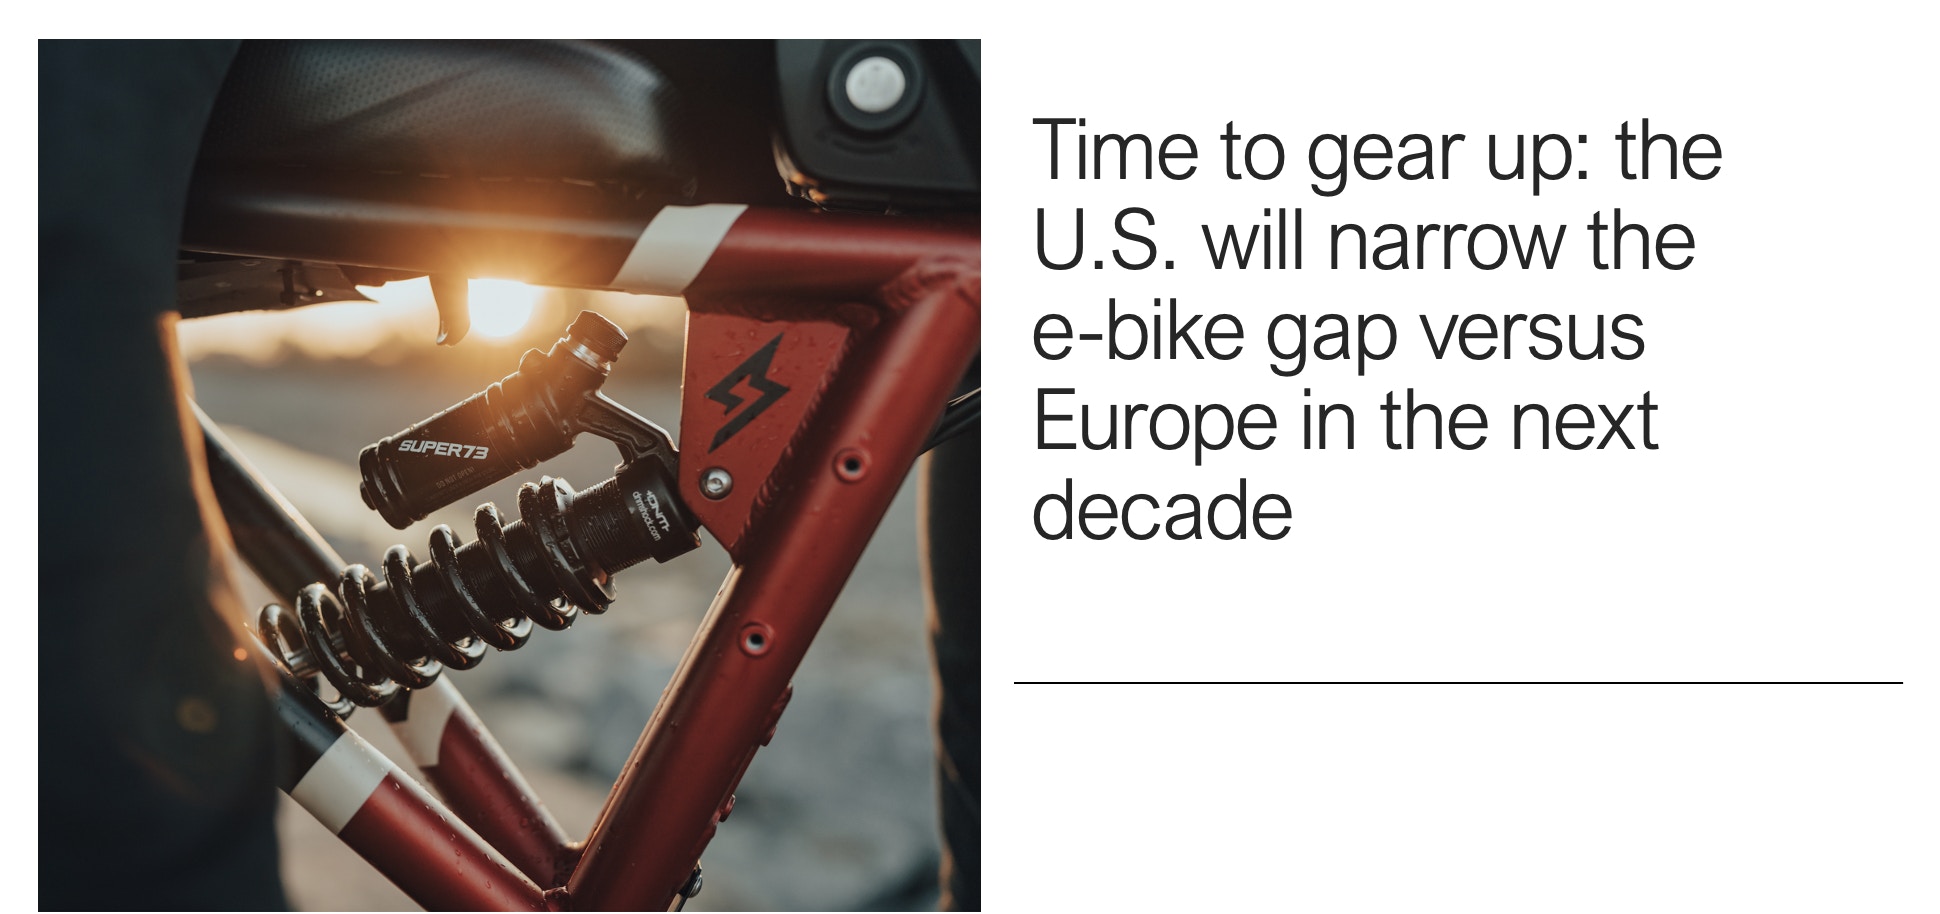 Time to gear up: the U.S. will narrow the e-bike gap versus Europe in the next decade